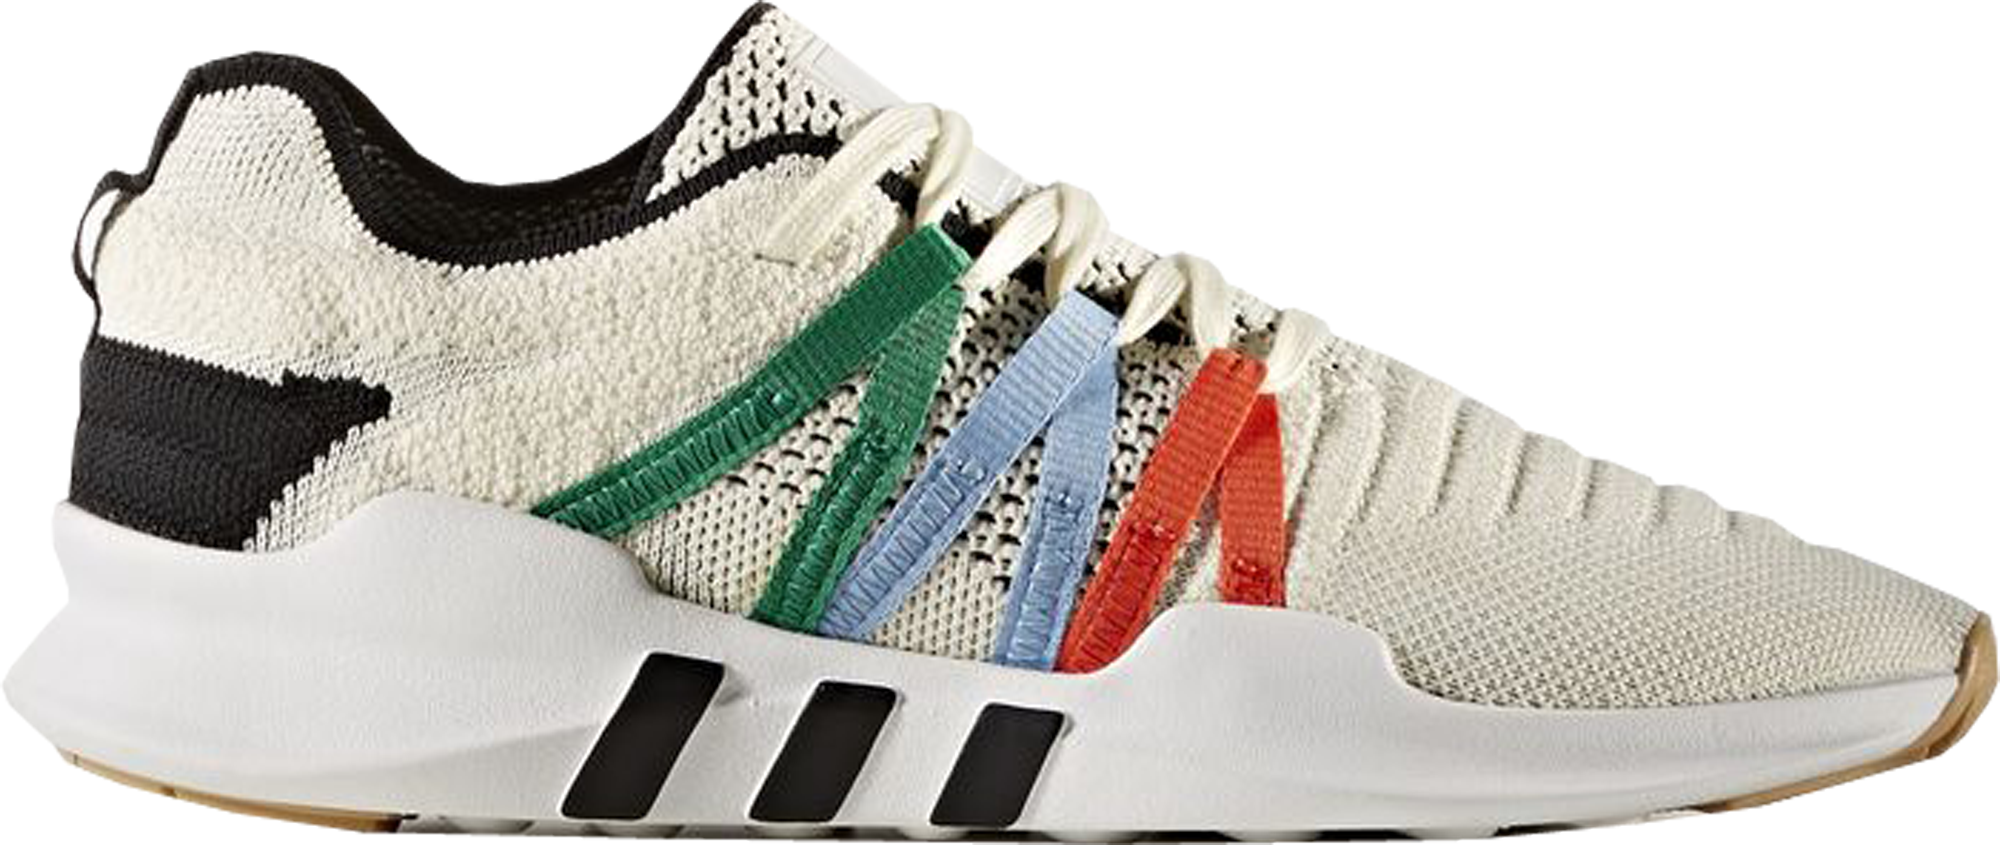 adidas eqt racing white and black